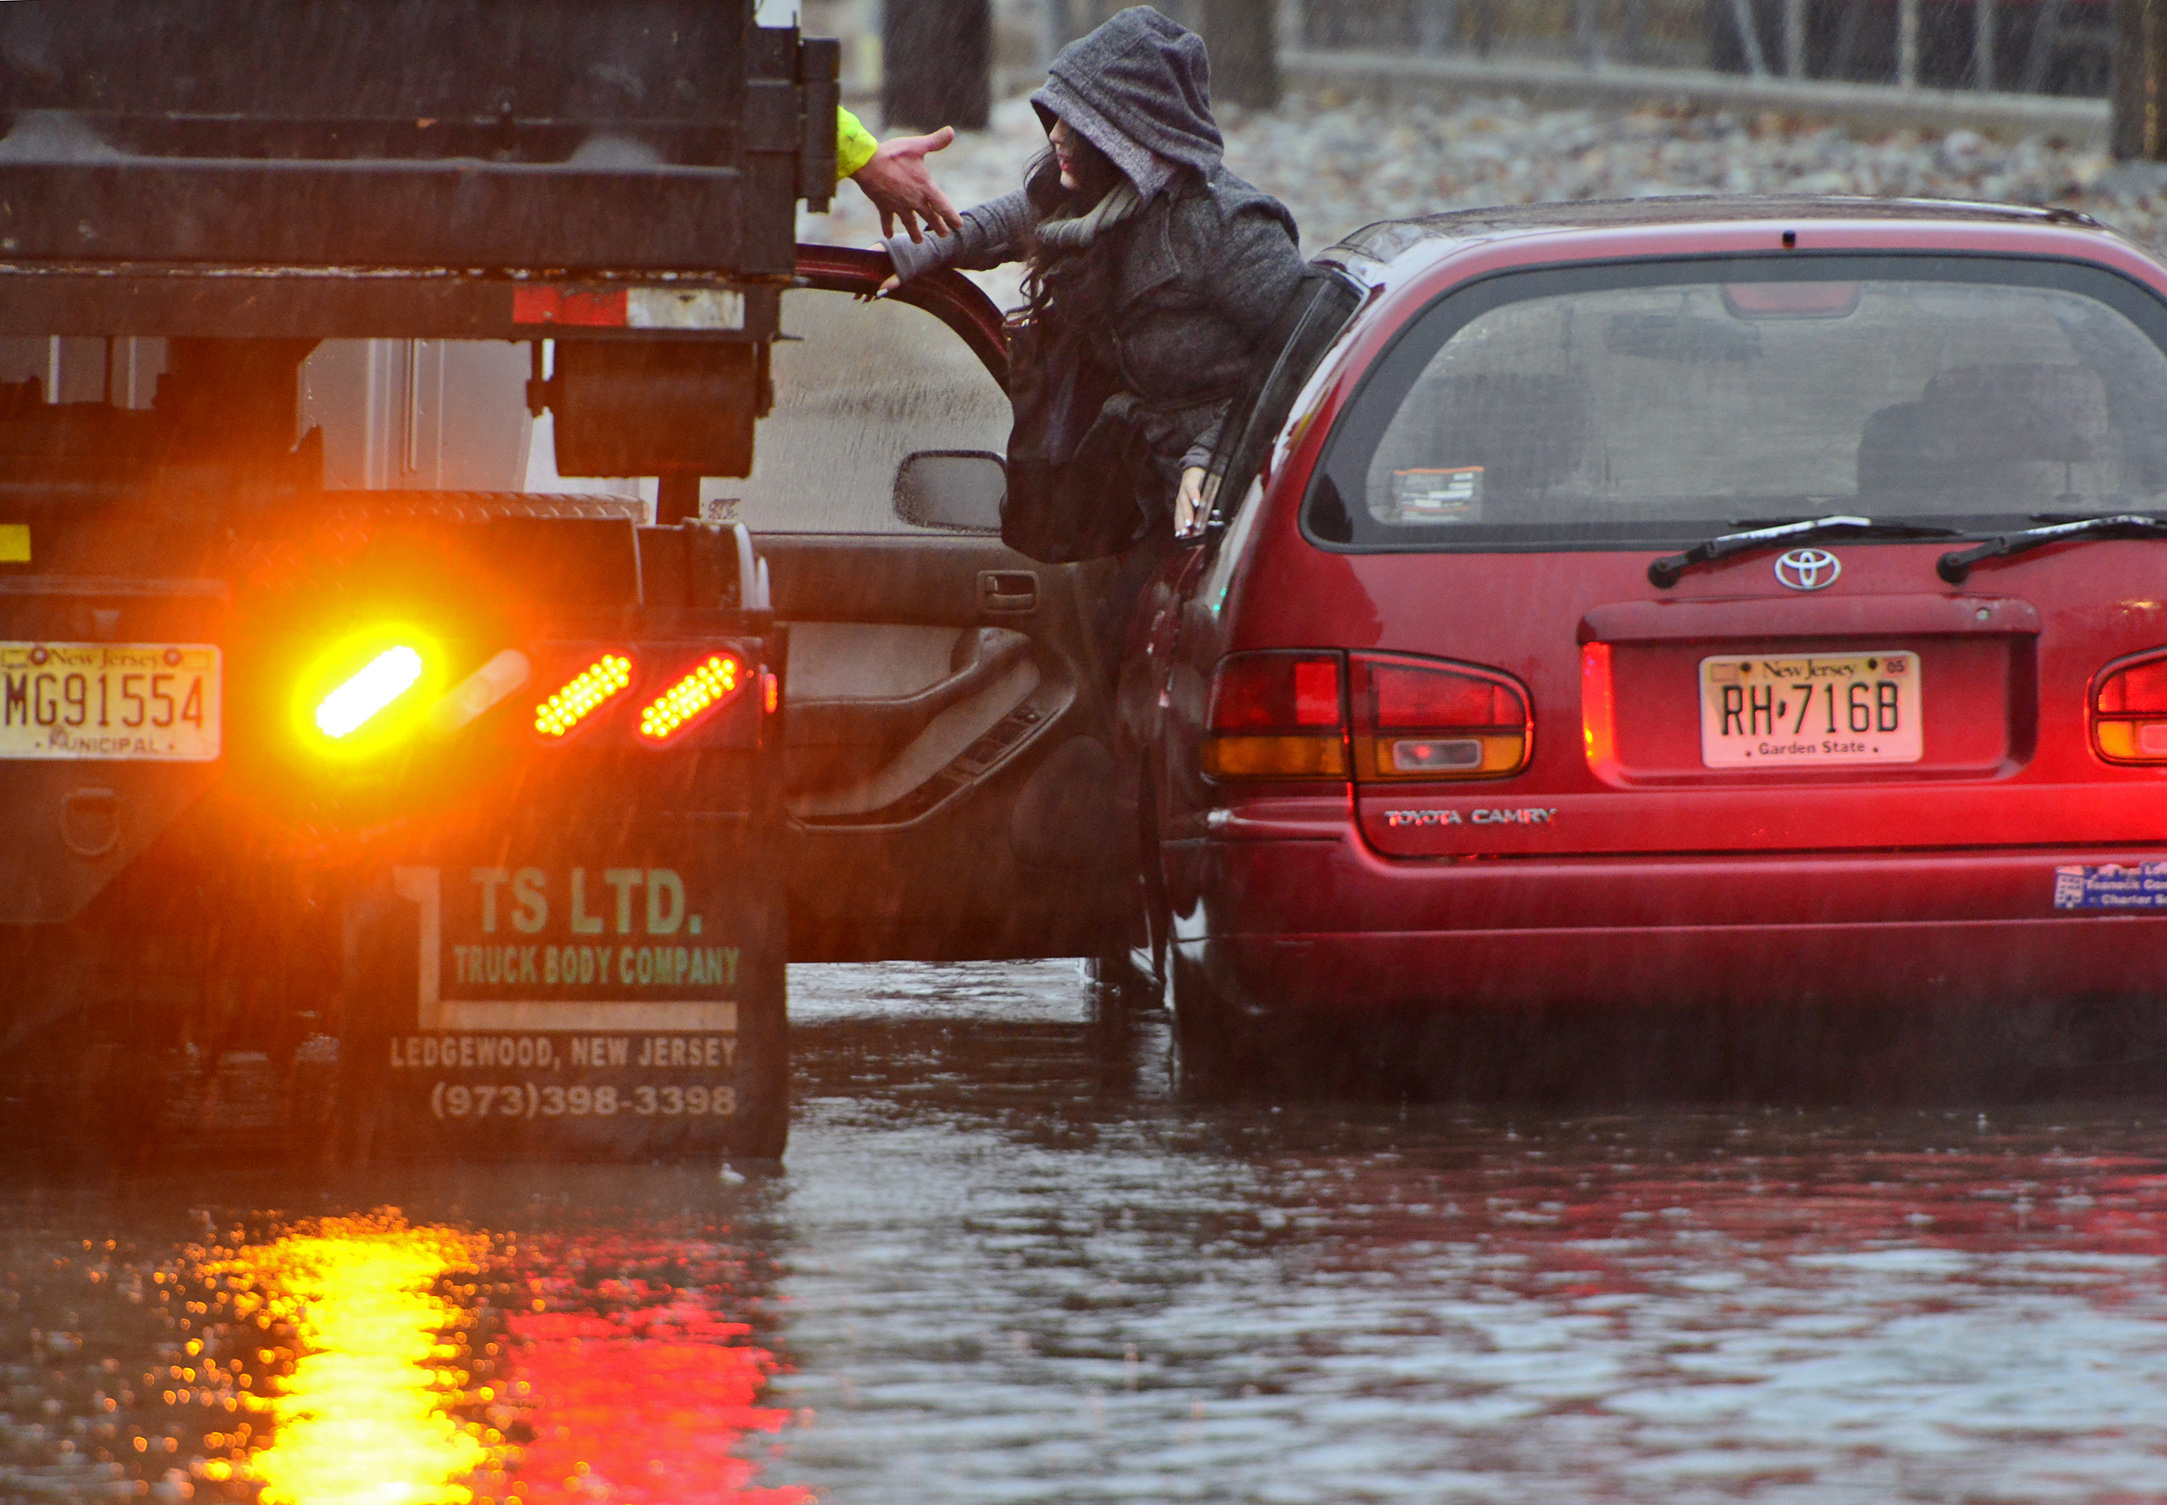 A woman is rescued from rising water after her Toyota Camry station wagon stalled out on West Fort Lee Rd as she approached the Hackensack River Tuesday morning, Dec. 9, 2014, in Bogota, N.J.